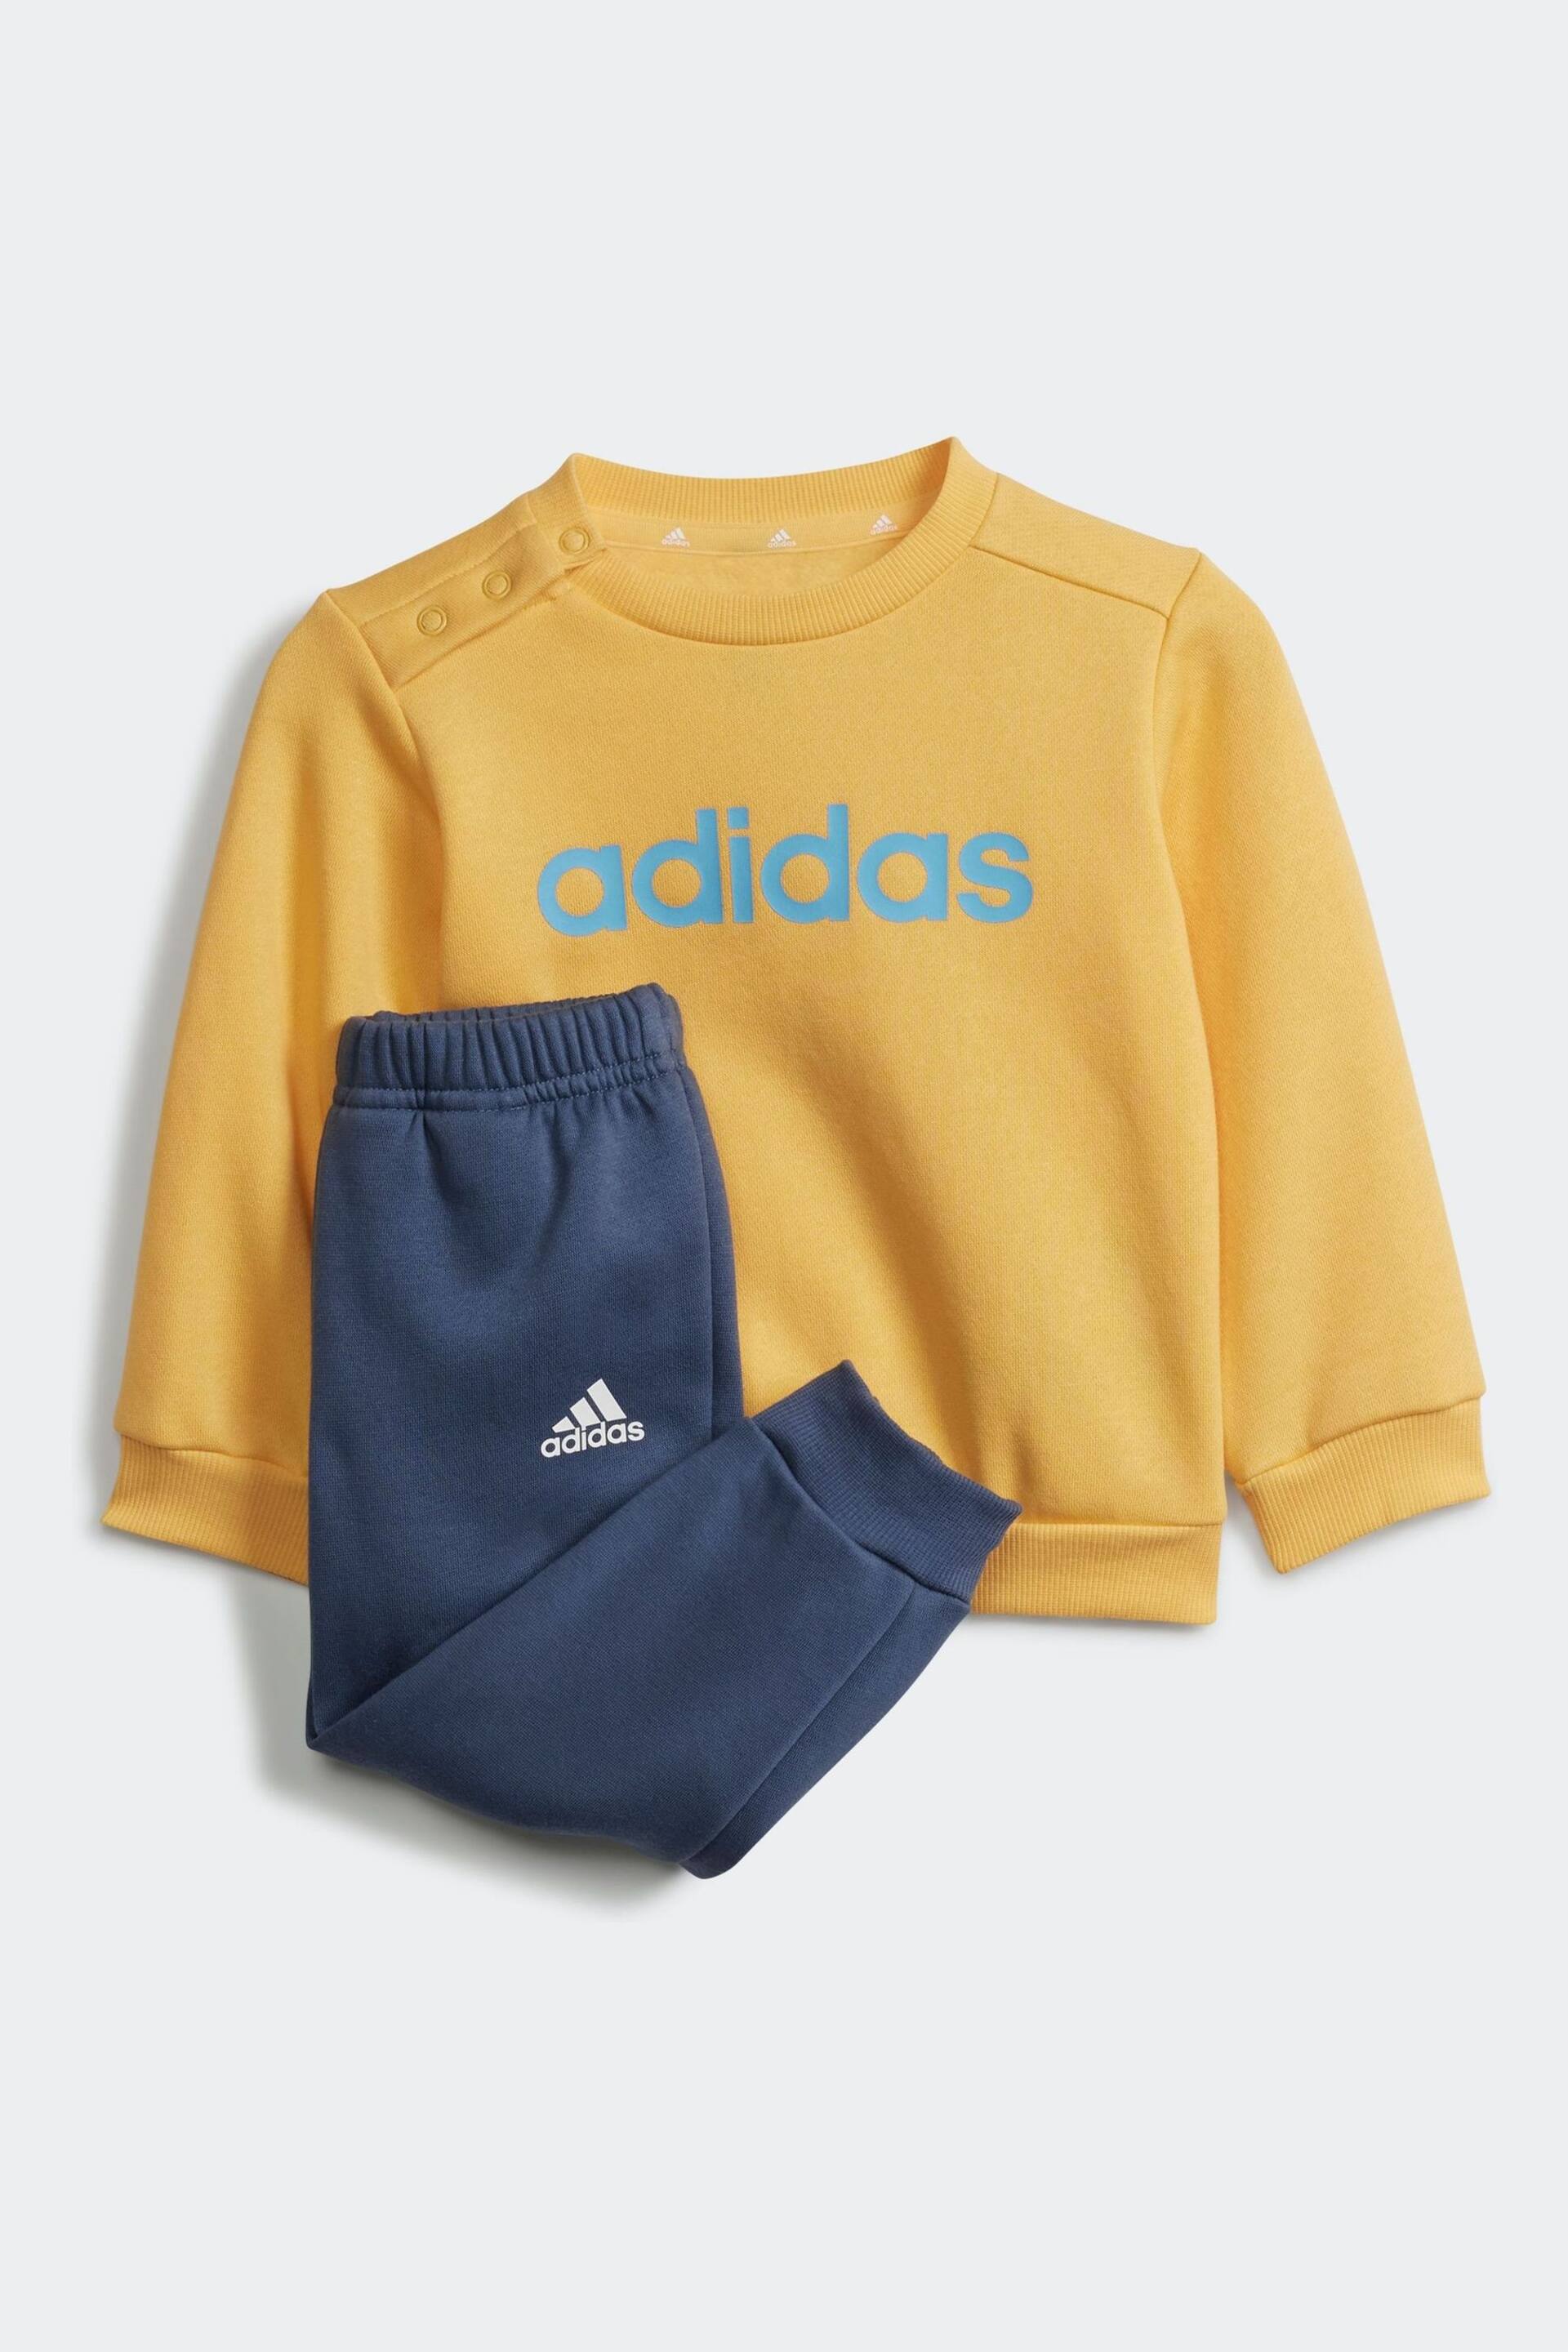 adidas Yellow/Blue Sportswear Essentials Lineage Joggers Set - Image 1 of 6